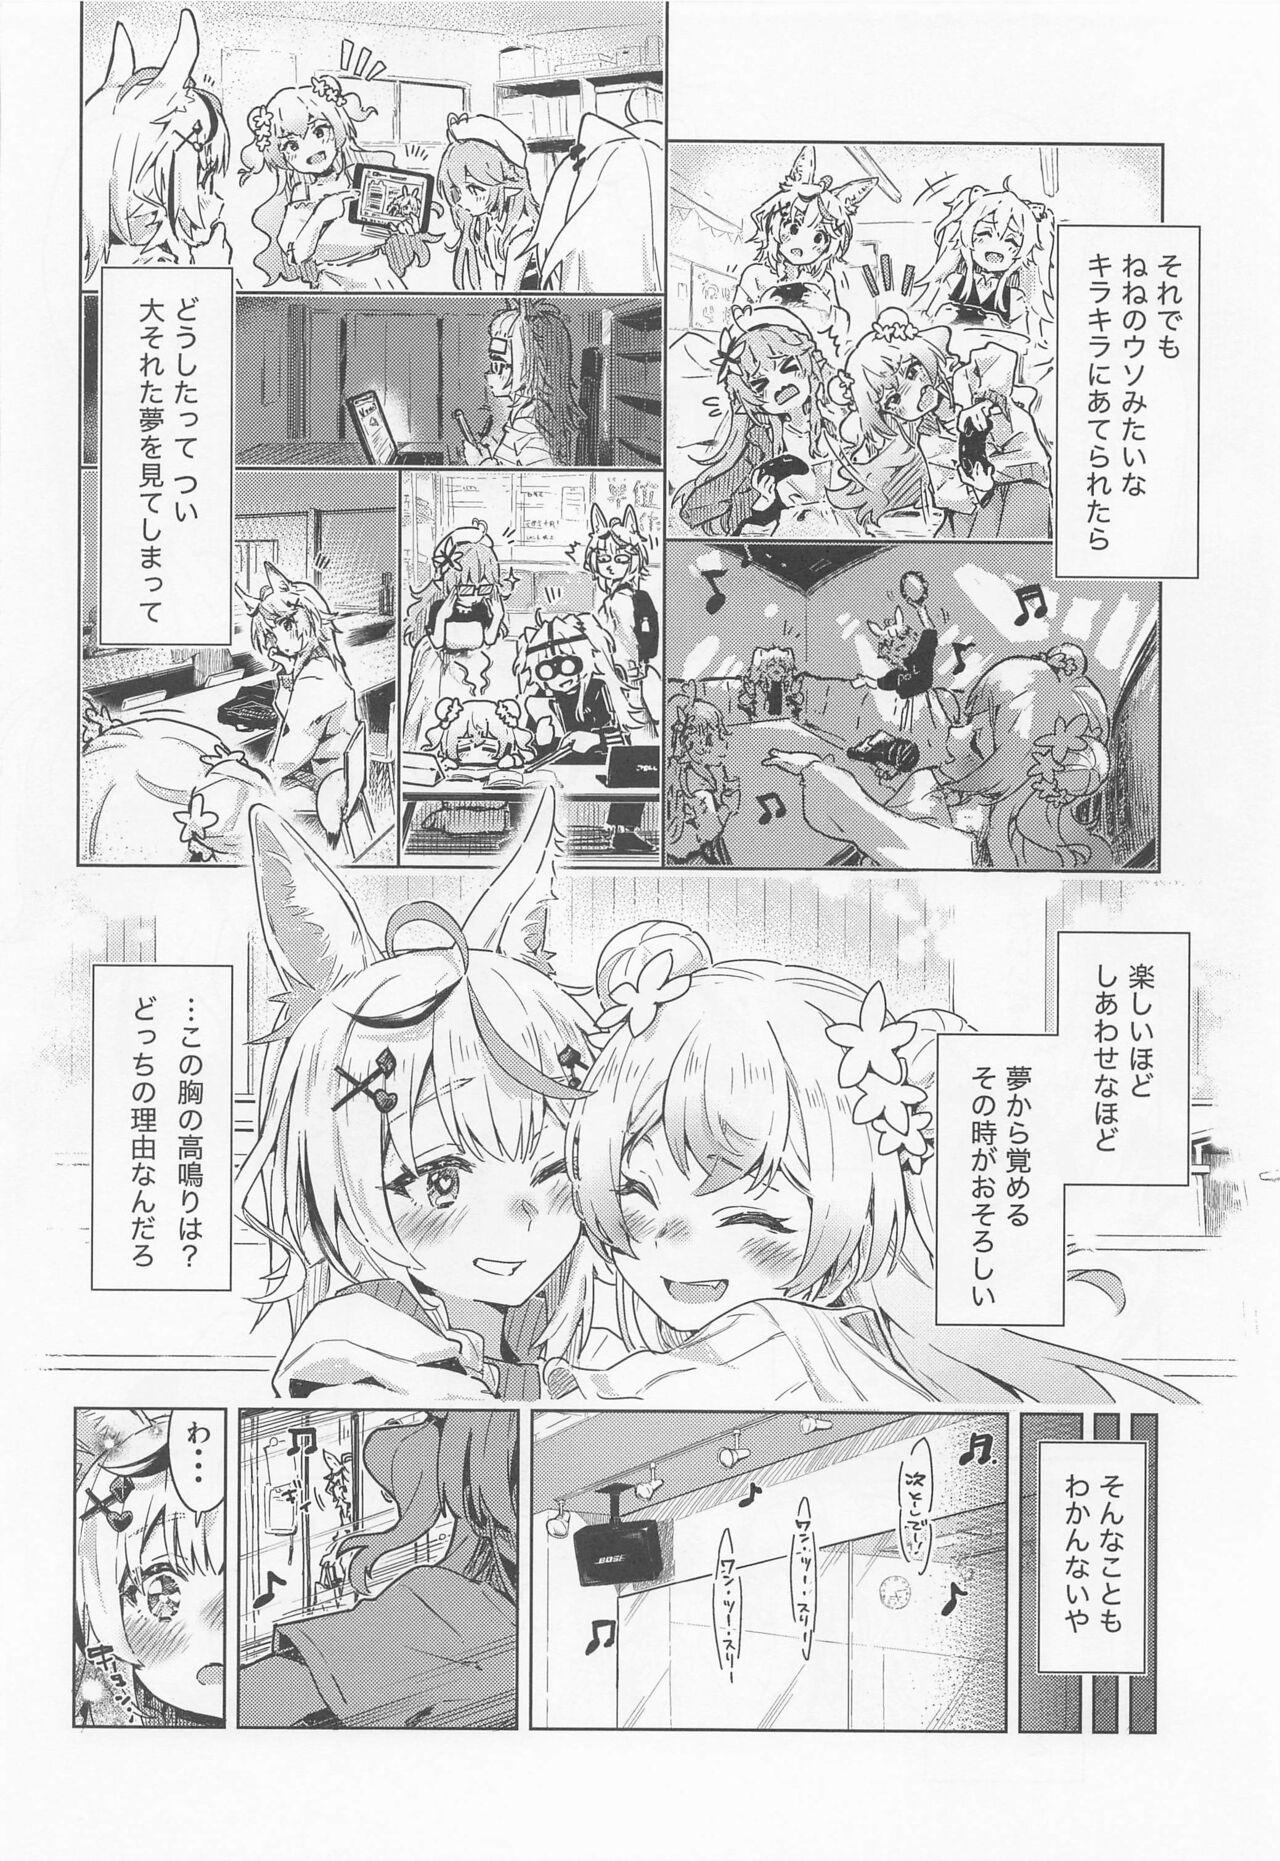 Dildos Fennec wa Iseijin no Yume o Miru ka - Does The Fennec Dream of The Lovely Visitor? - Hololive Gay - Page 5